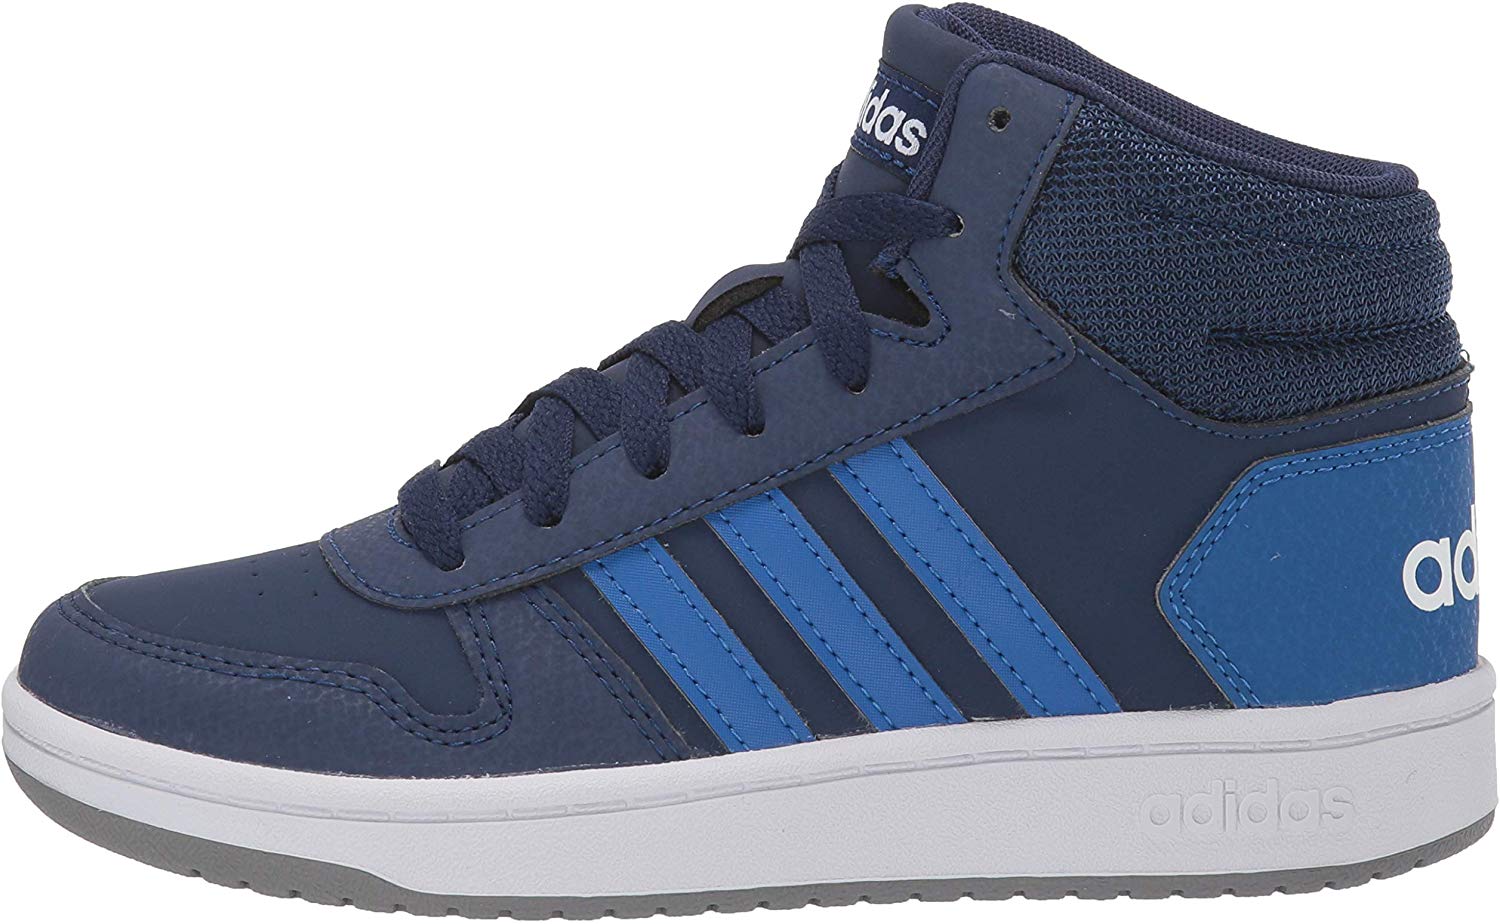 Kids Adidas Boys Hoops Mid 2.0 Leather Low Top, Dark Blue/Blue/White ...